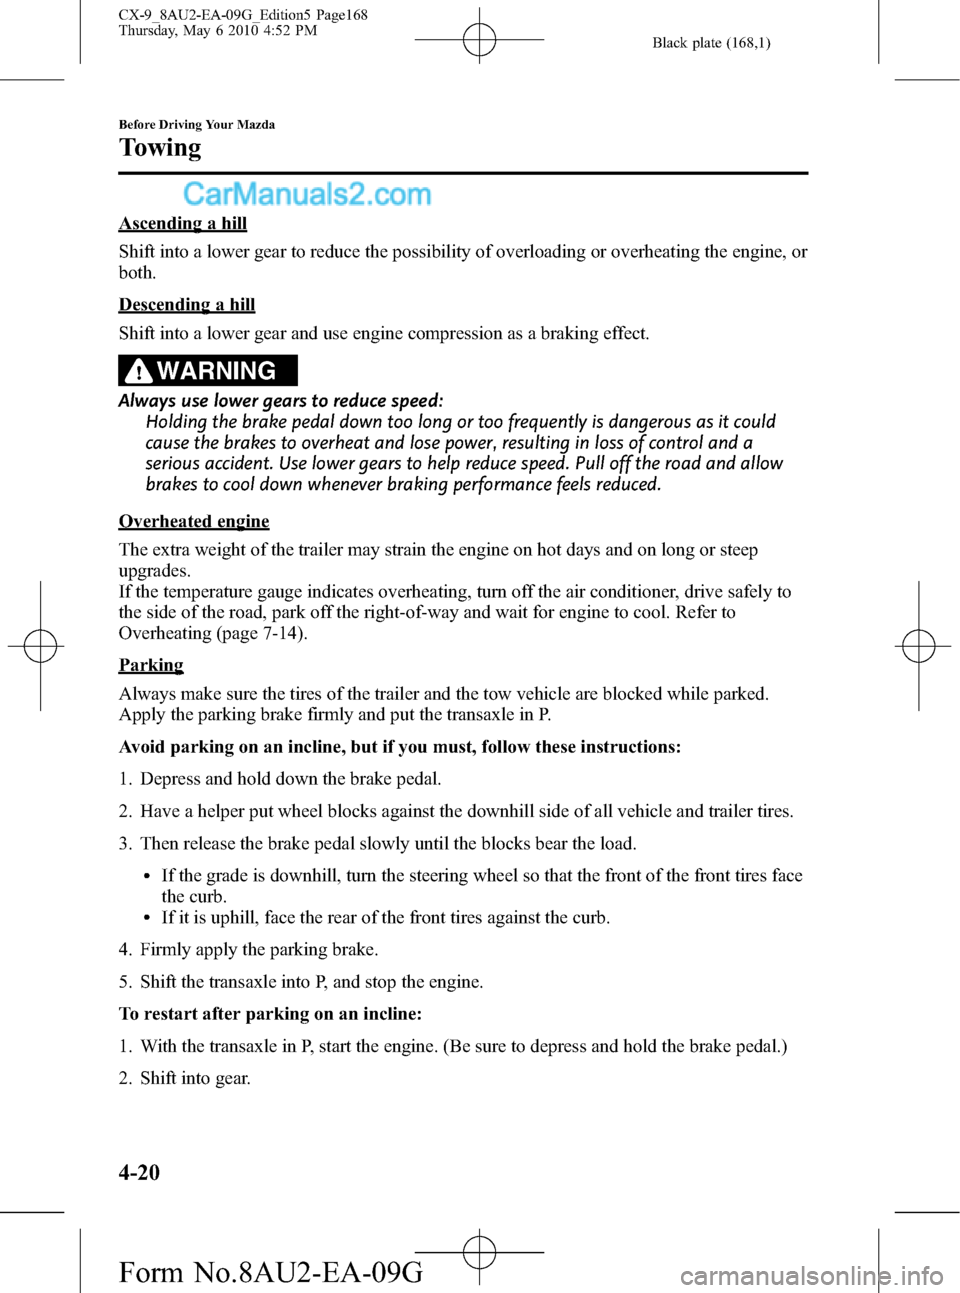 MAZDA MODEL CX-9 2010  Owners Manual (in English) Black plate (168,1)
Ascending a hill
Shift into a lower gear to reduce the possibility of overloading or overheating the engine, or
both.
Descending a hill
Shift into a lower gear and use engine compr